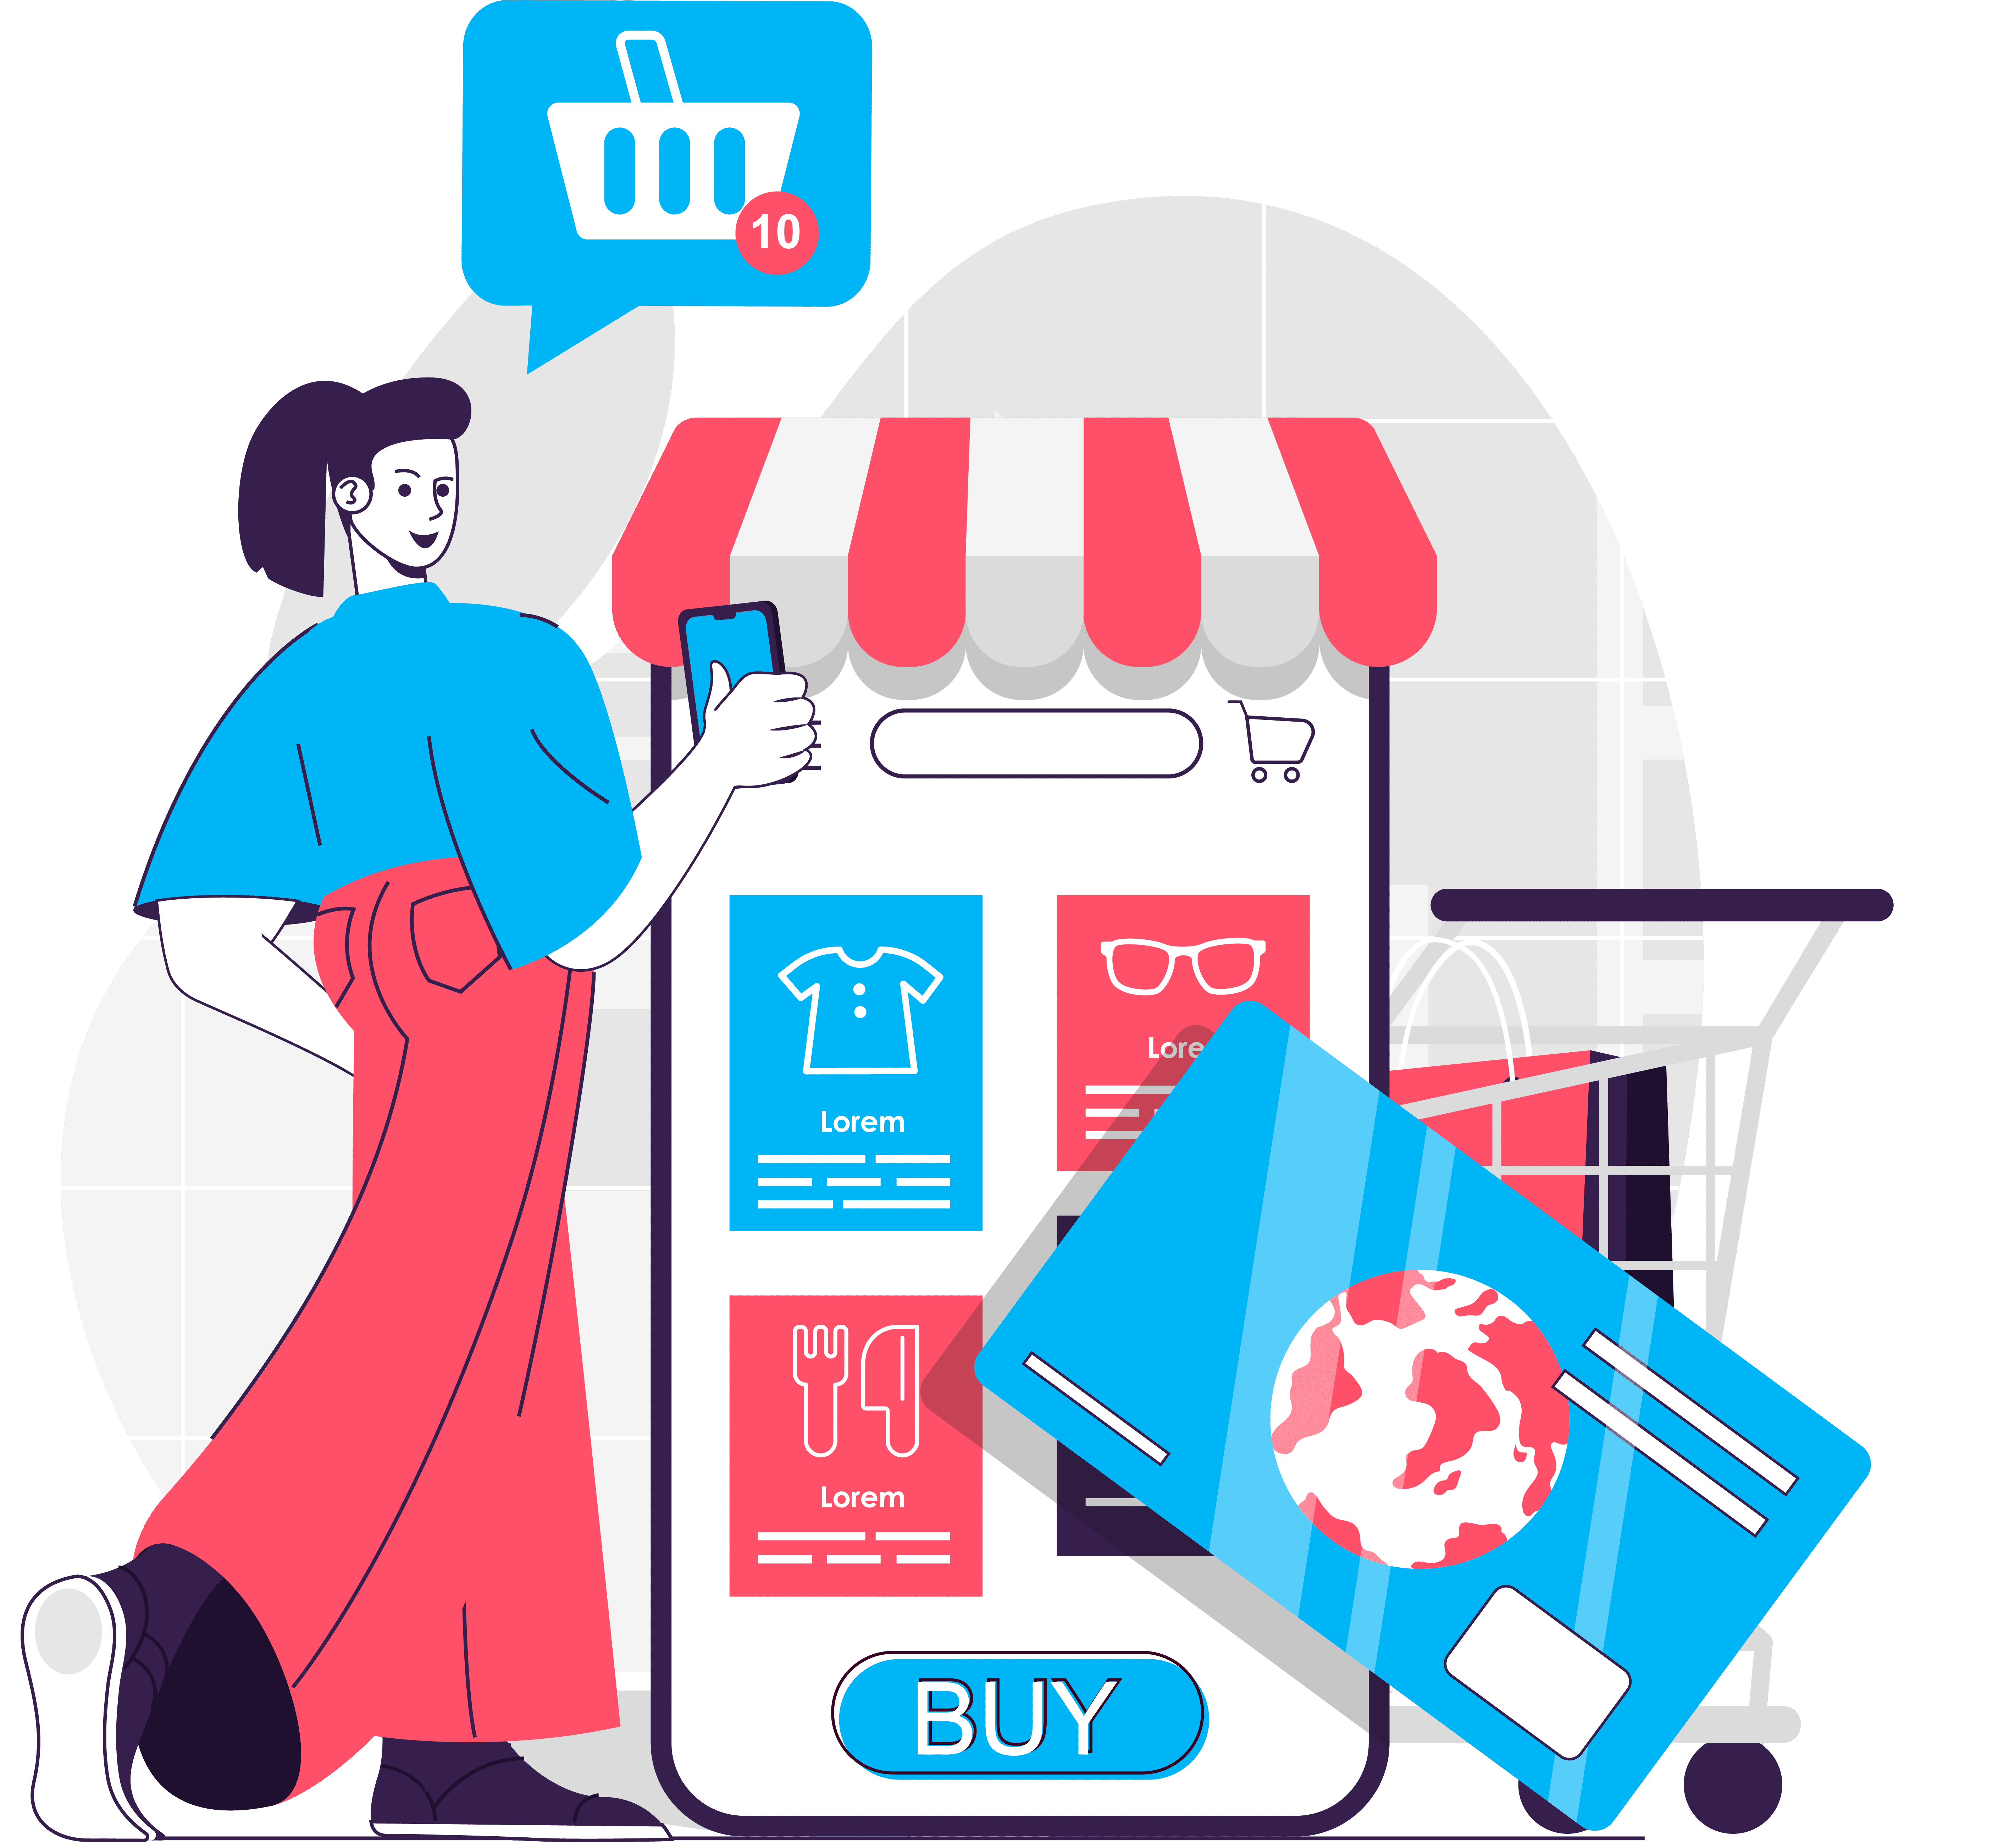 ecommerce, e commerce, e-commerce, b2b e-commerce, business to consumer b2c, electronic commerce